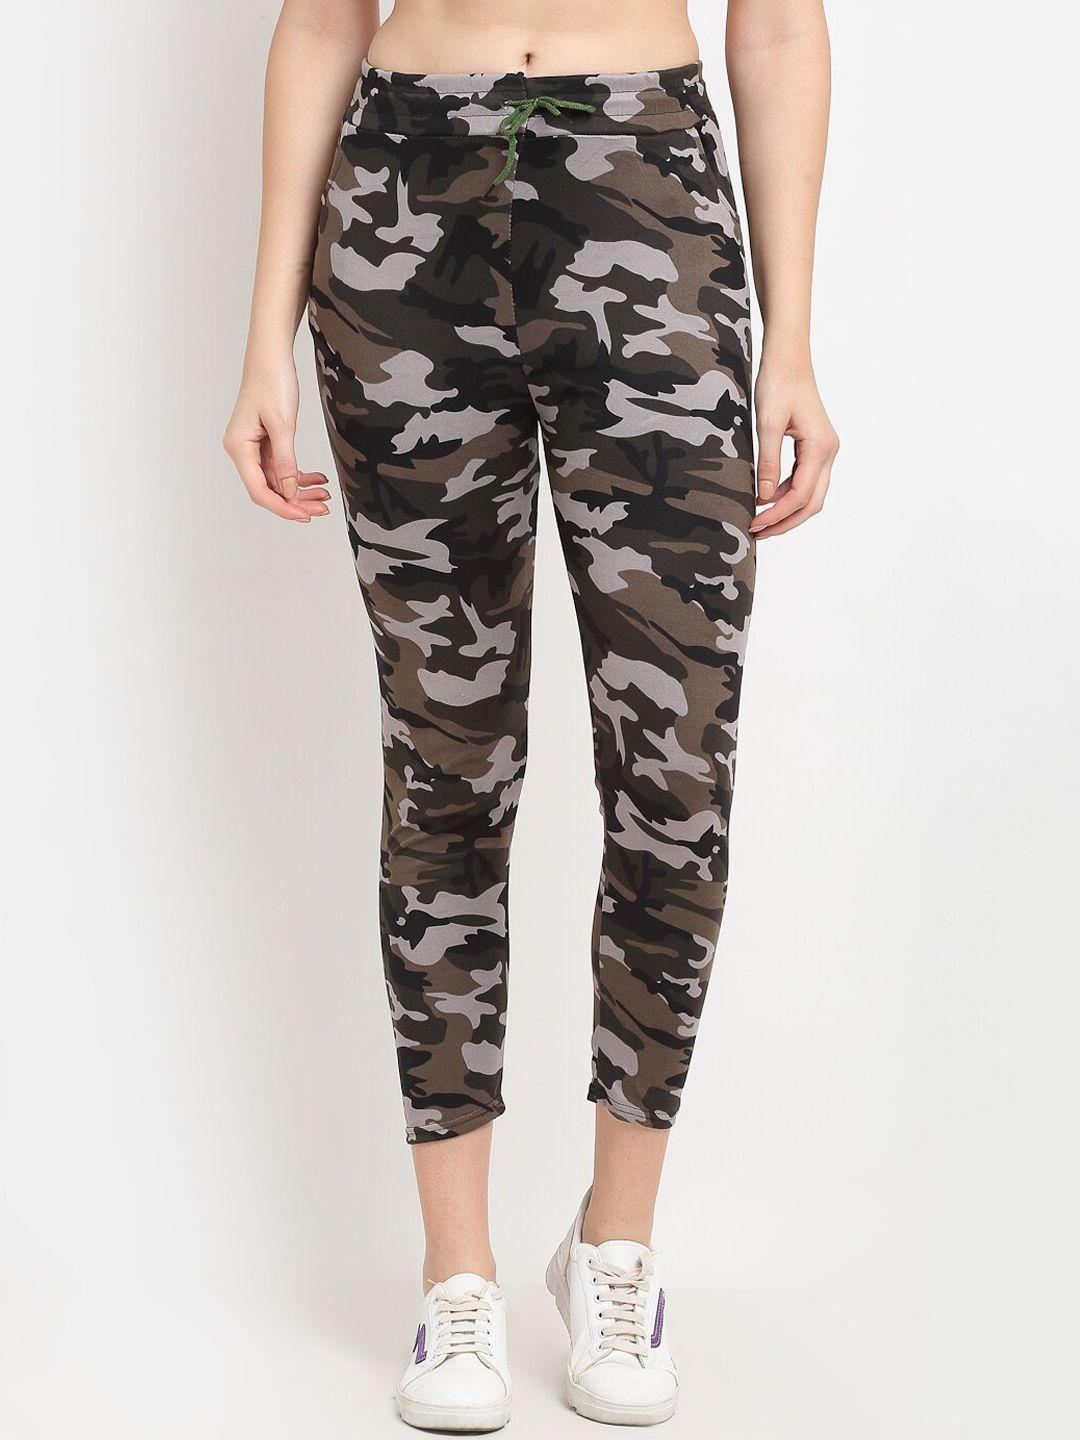 tag 7 women grey & beige camouflage printed trousers